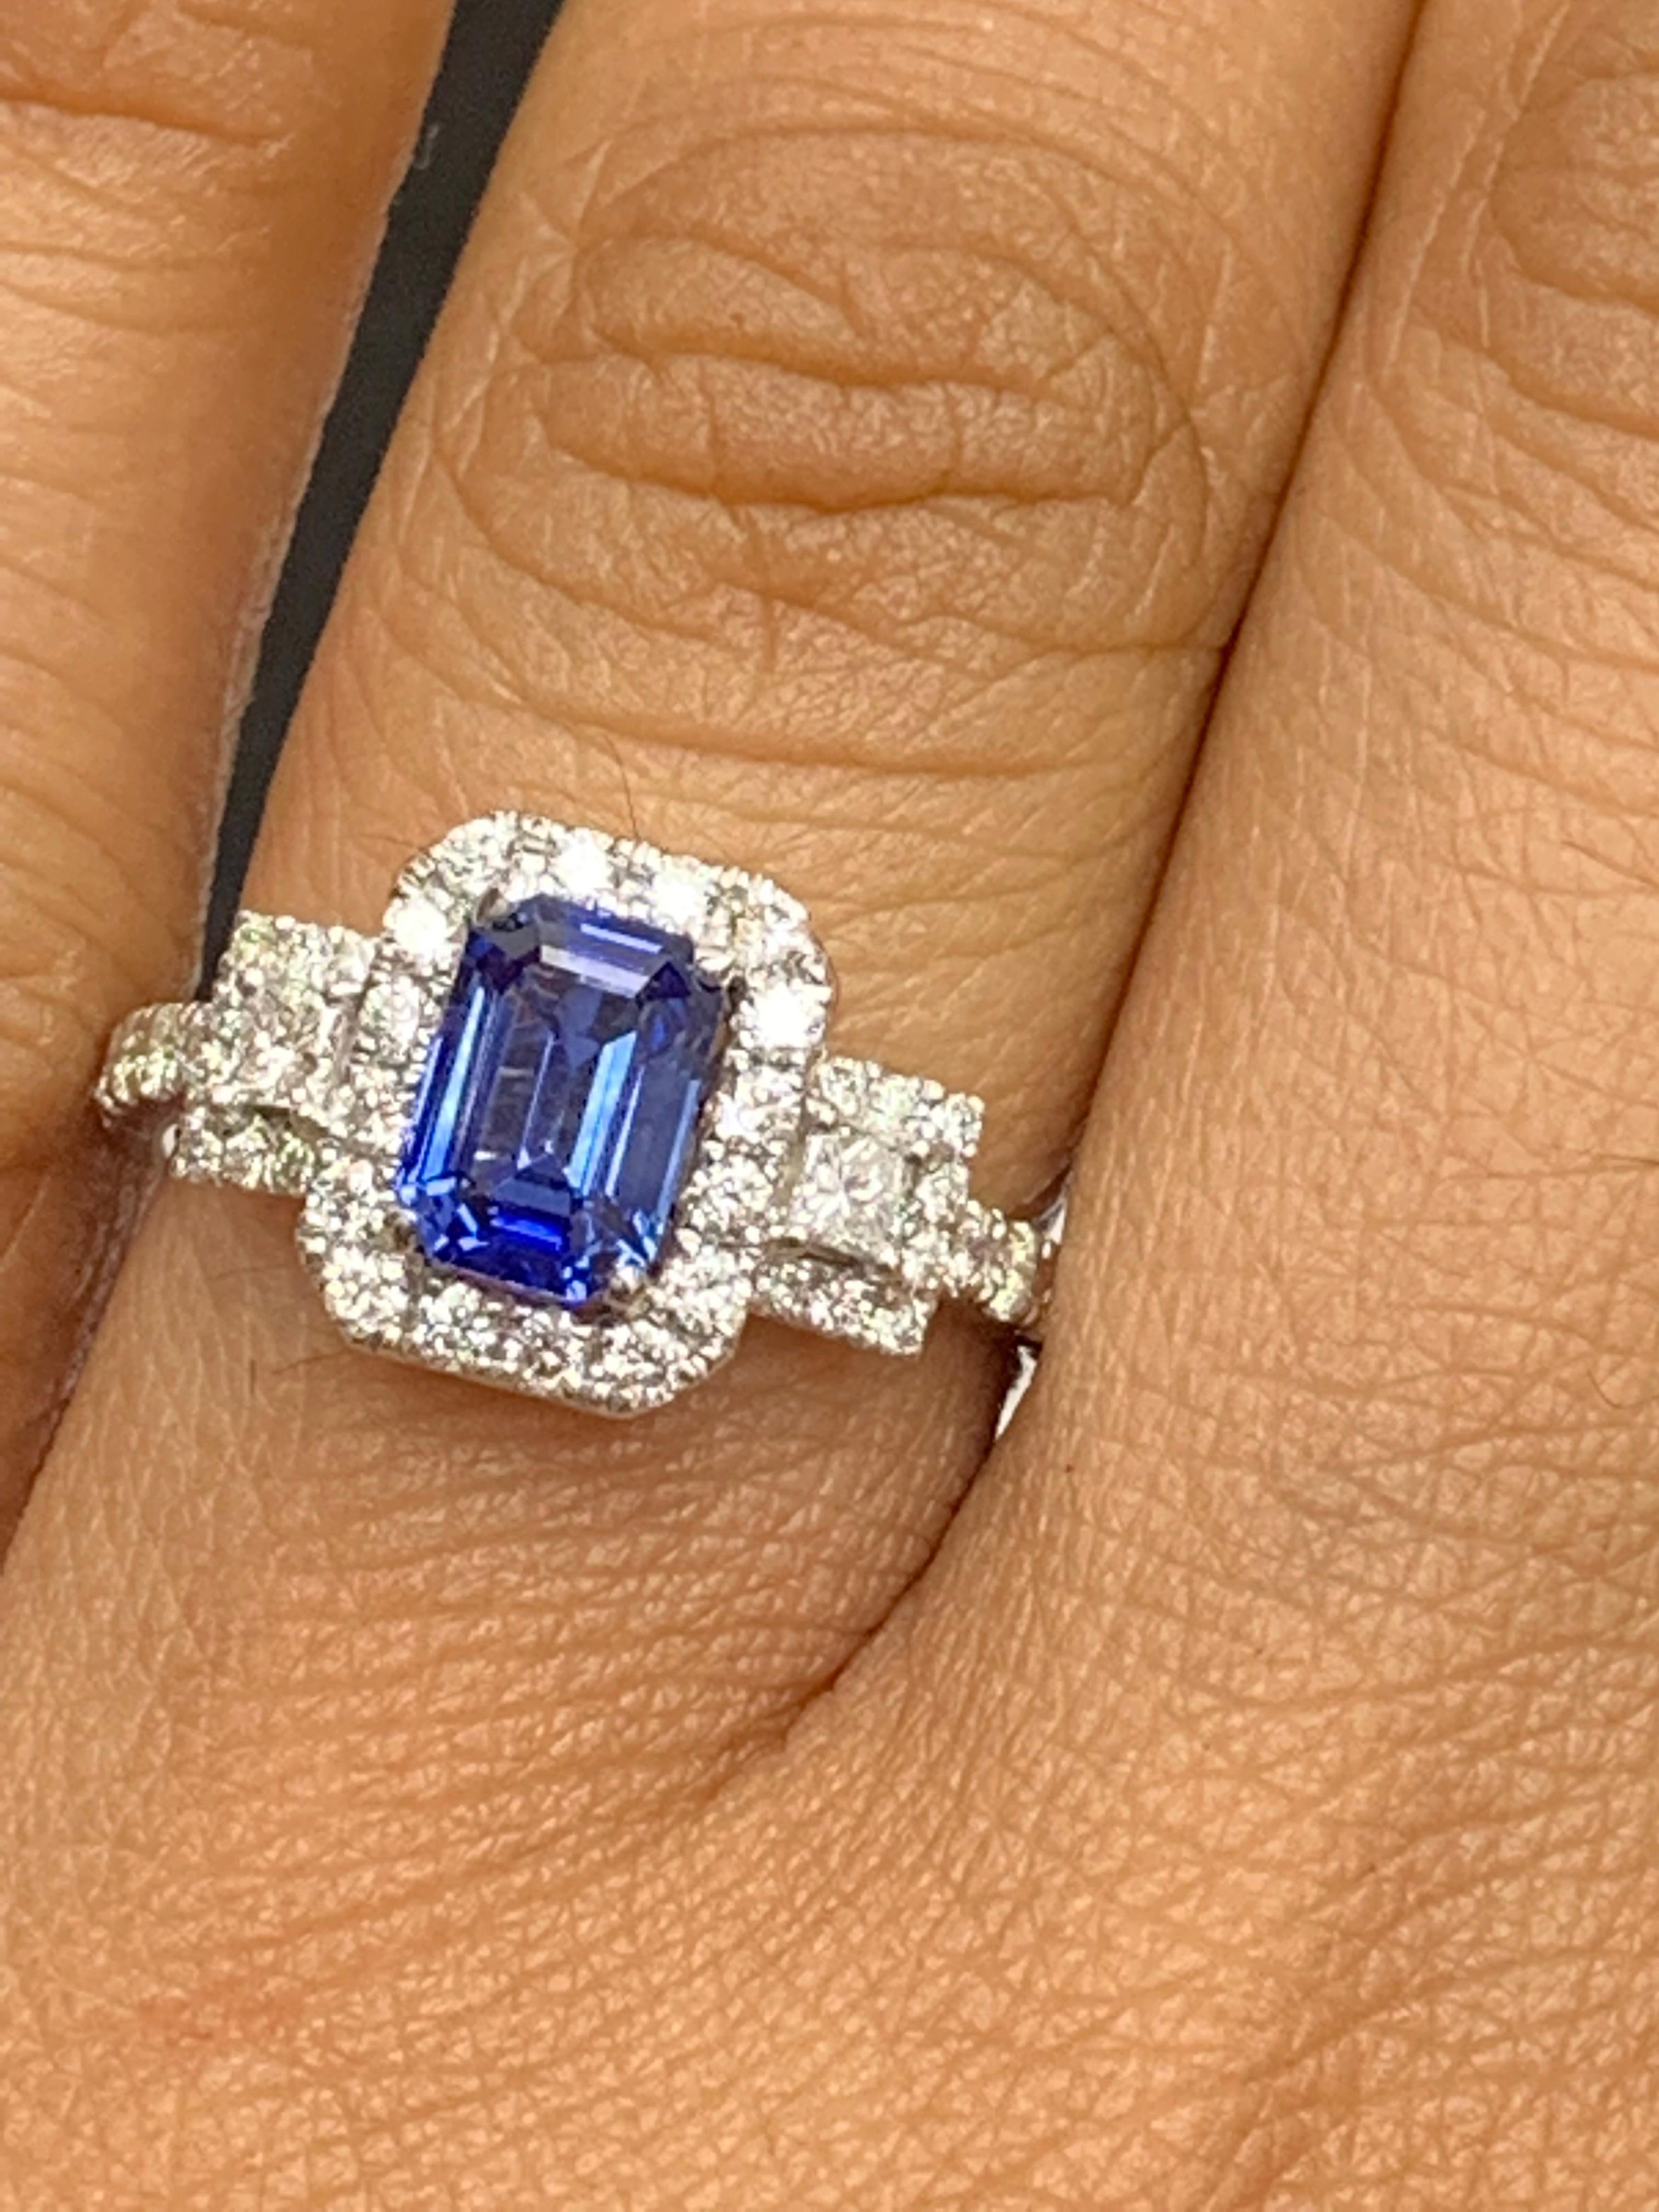 A stunning ring showcasing a rich blue emerald cut sapphire weighing 1.14 carats surrounded by diamonds. The center stone is surrounded by a row of 42 diamonds, weighing 0.58 carats total, with 2 princesses cut diamonds on each side weighing 0.12